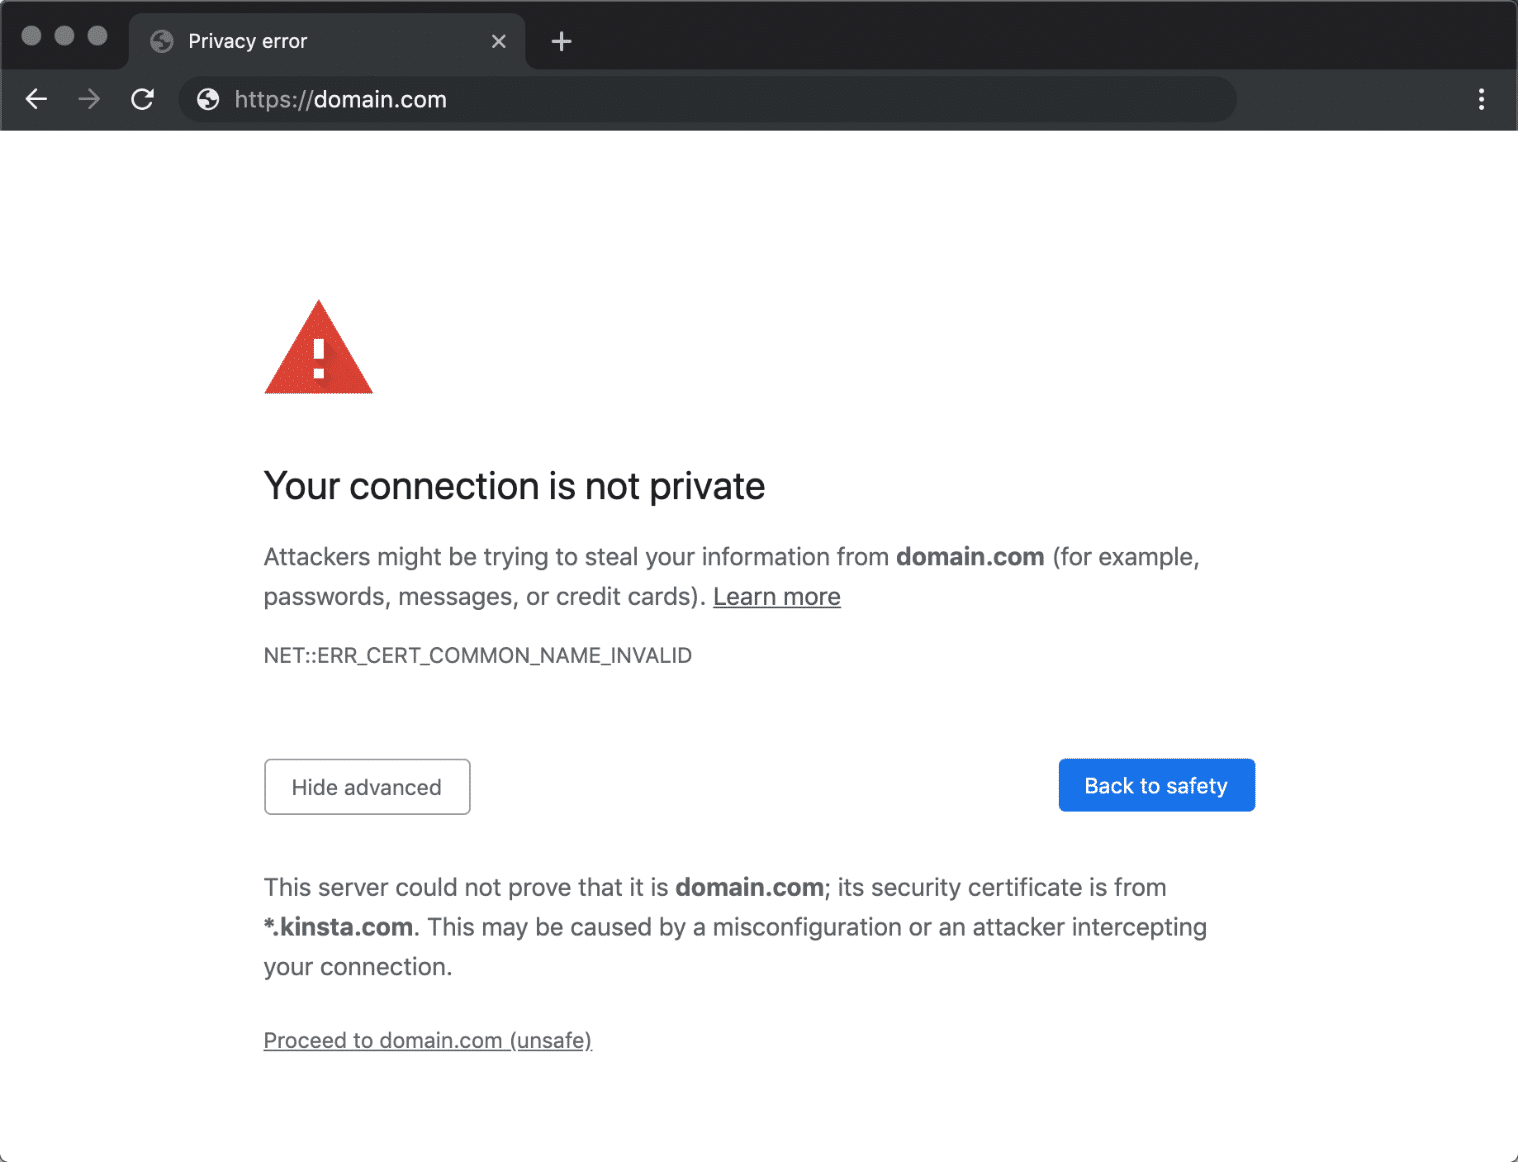 Loi Your connection is not private tren Google Chrome